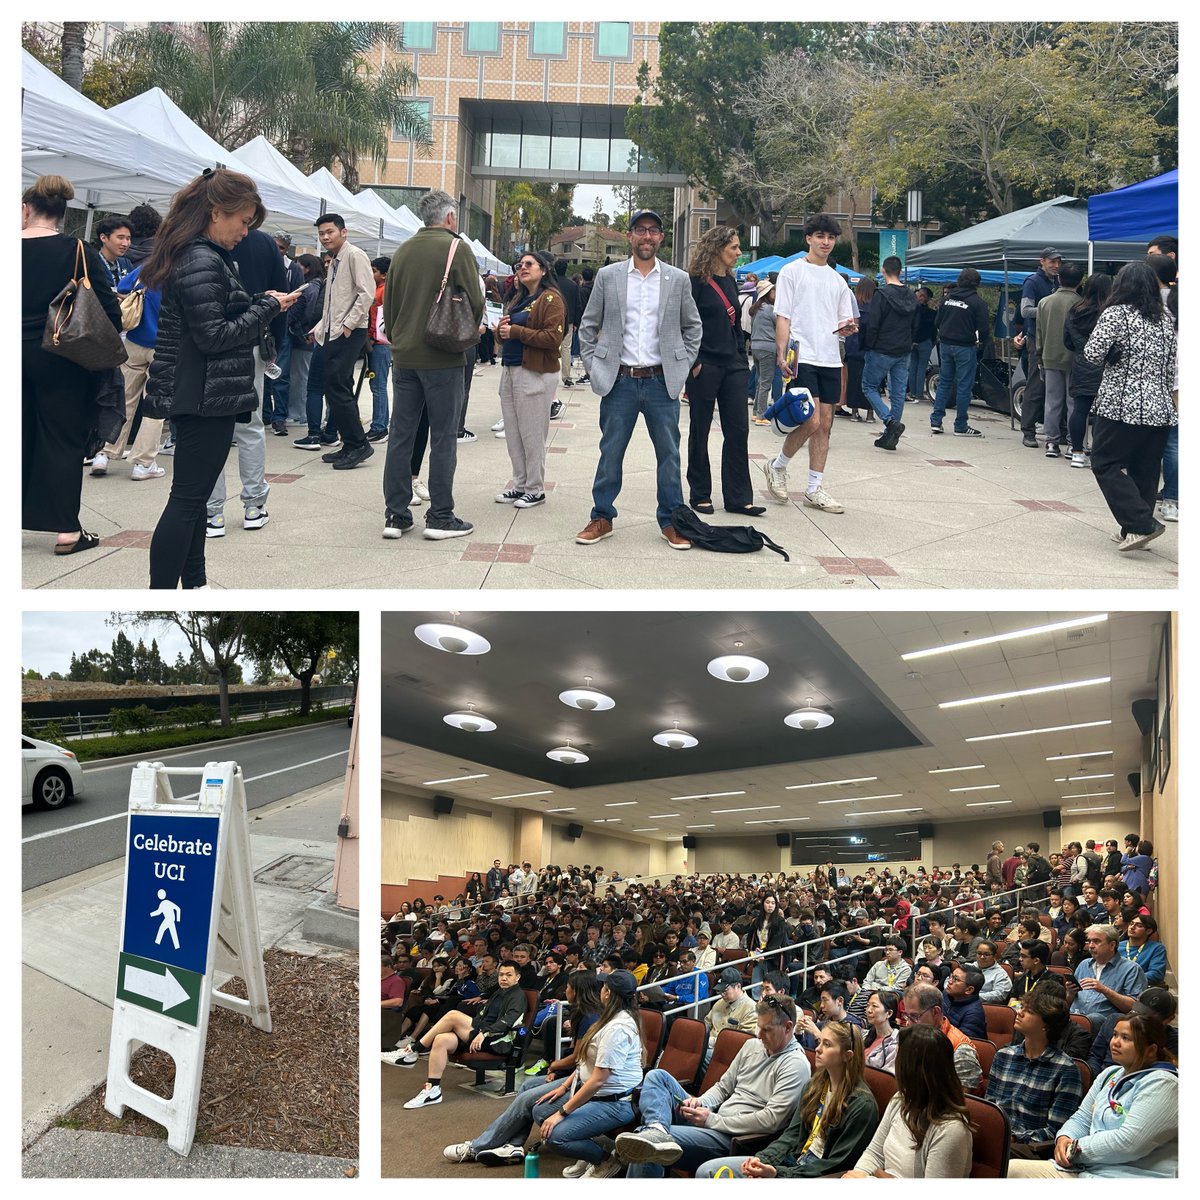 Great turnout for Celebrate UCI where we got to welcome newly admitted anteater engineers to campus and to @UCIEngineering . I just love the energy, excitement, and all-around positive vibes around this event.